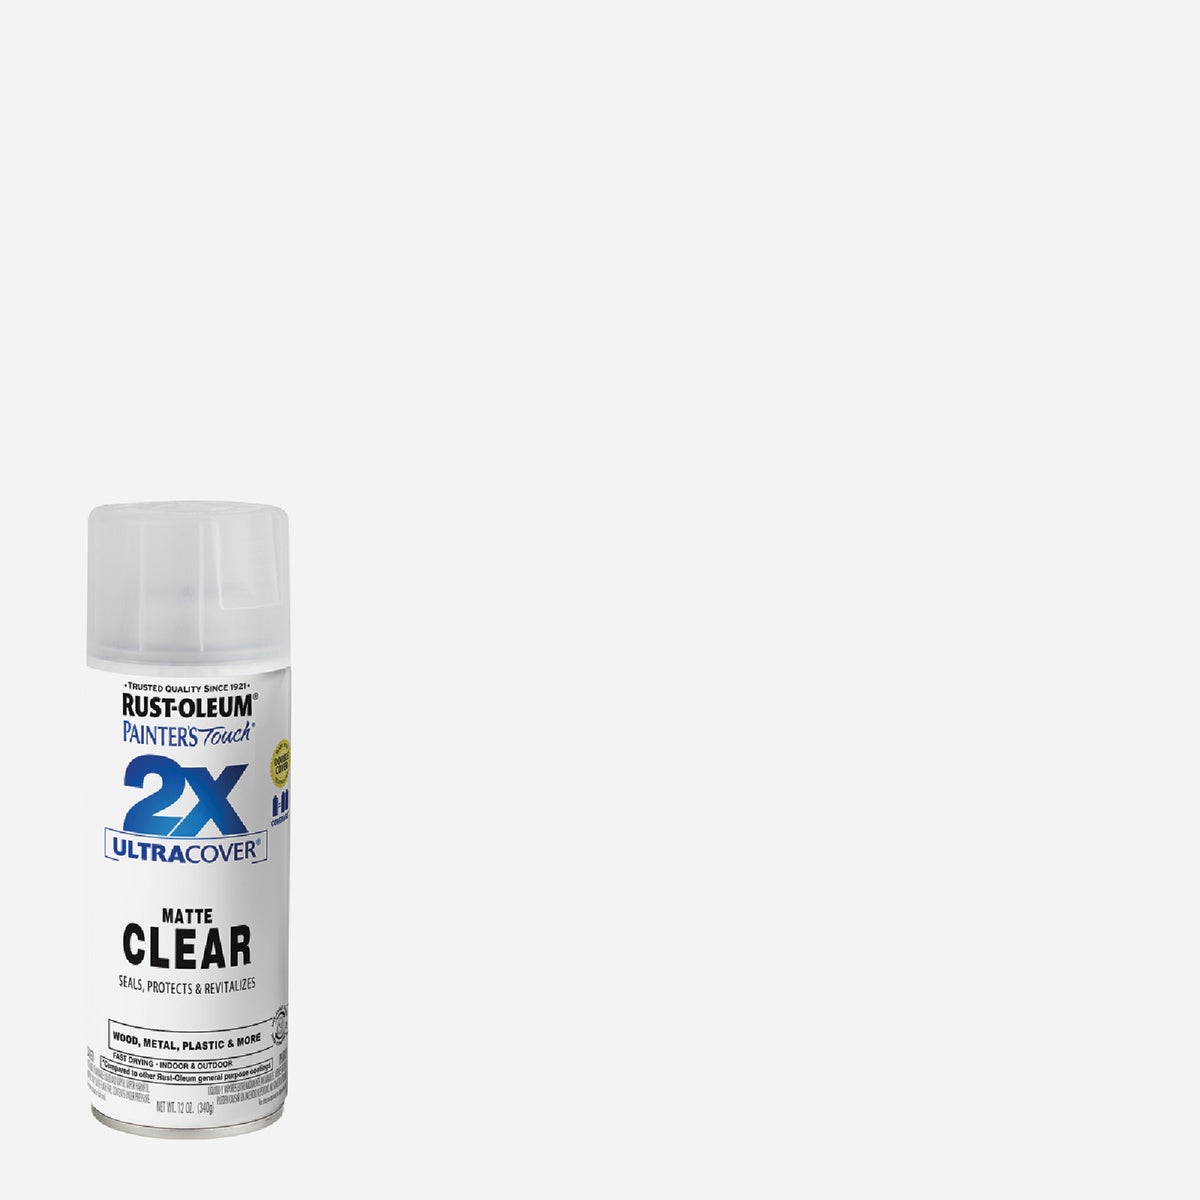 Item 796057, An all-purpose oil-based spray enamel paint for use on wood, metal, wicker